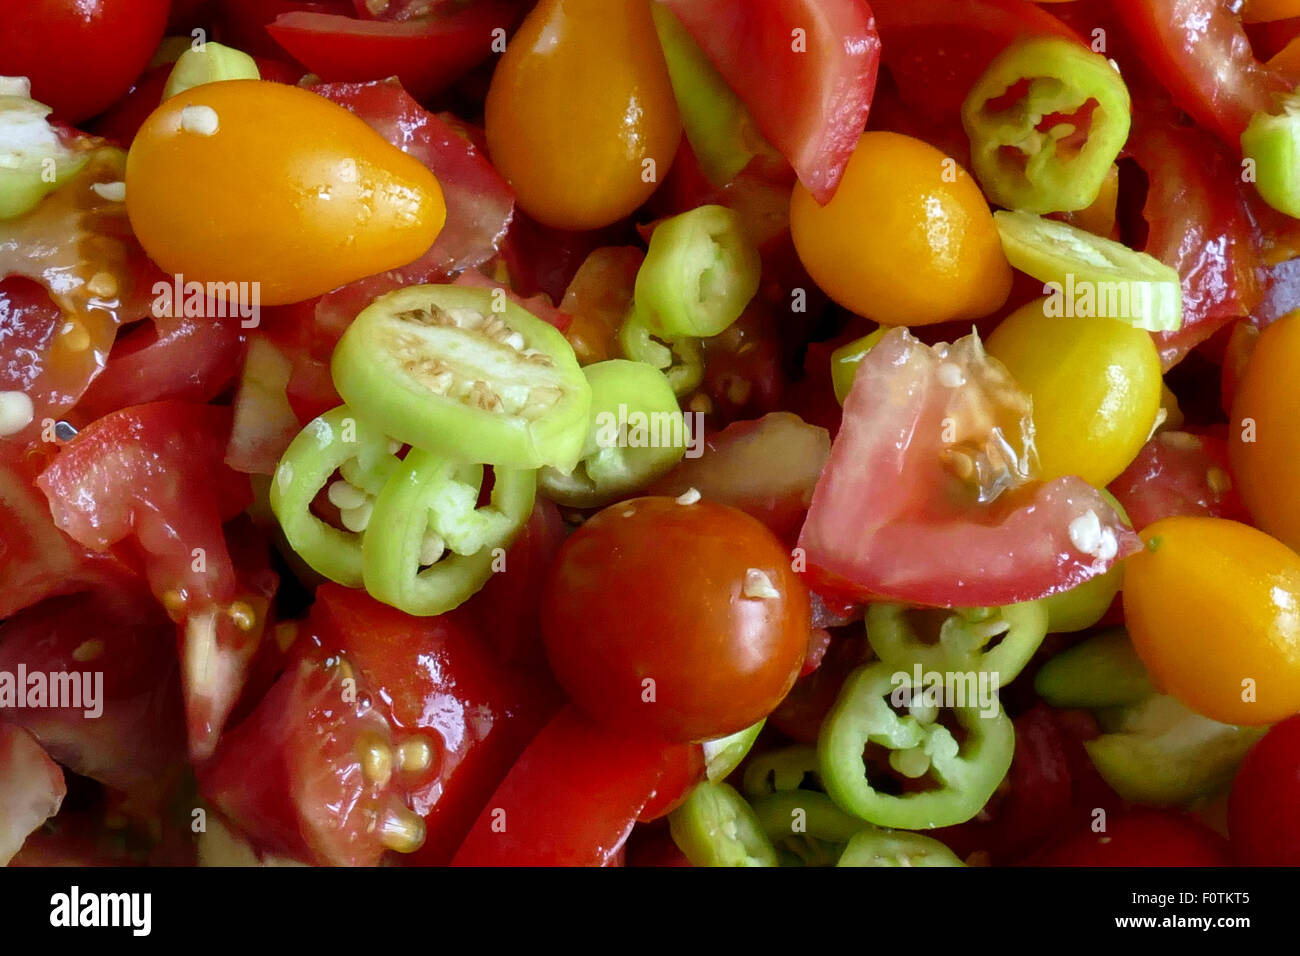 Chopped vegetables for canning. Stock Photo